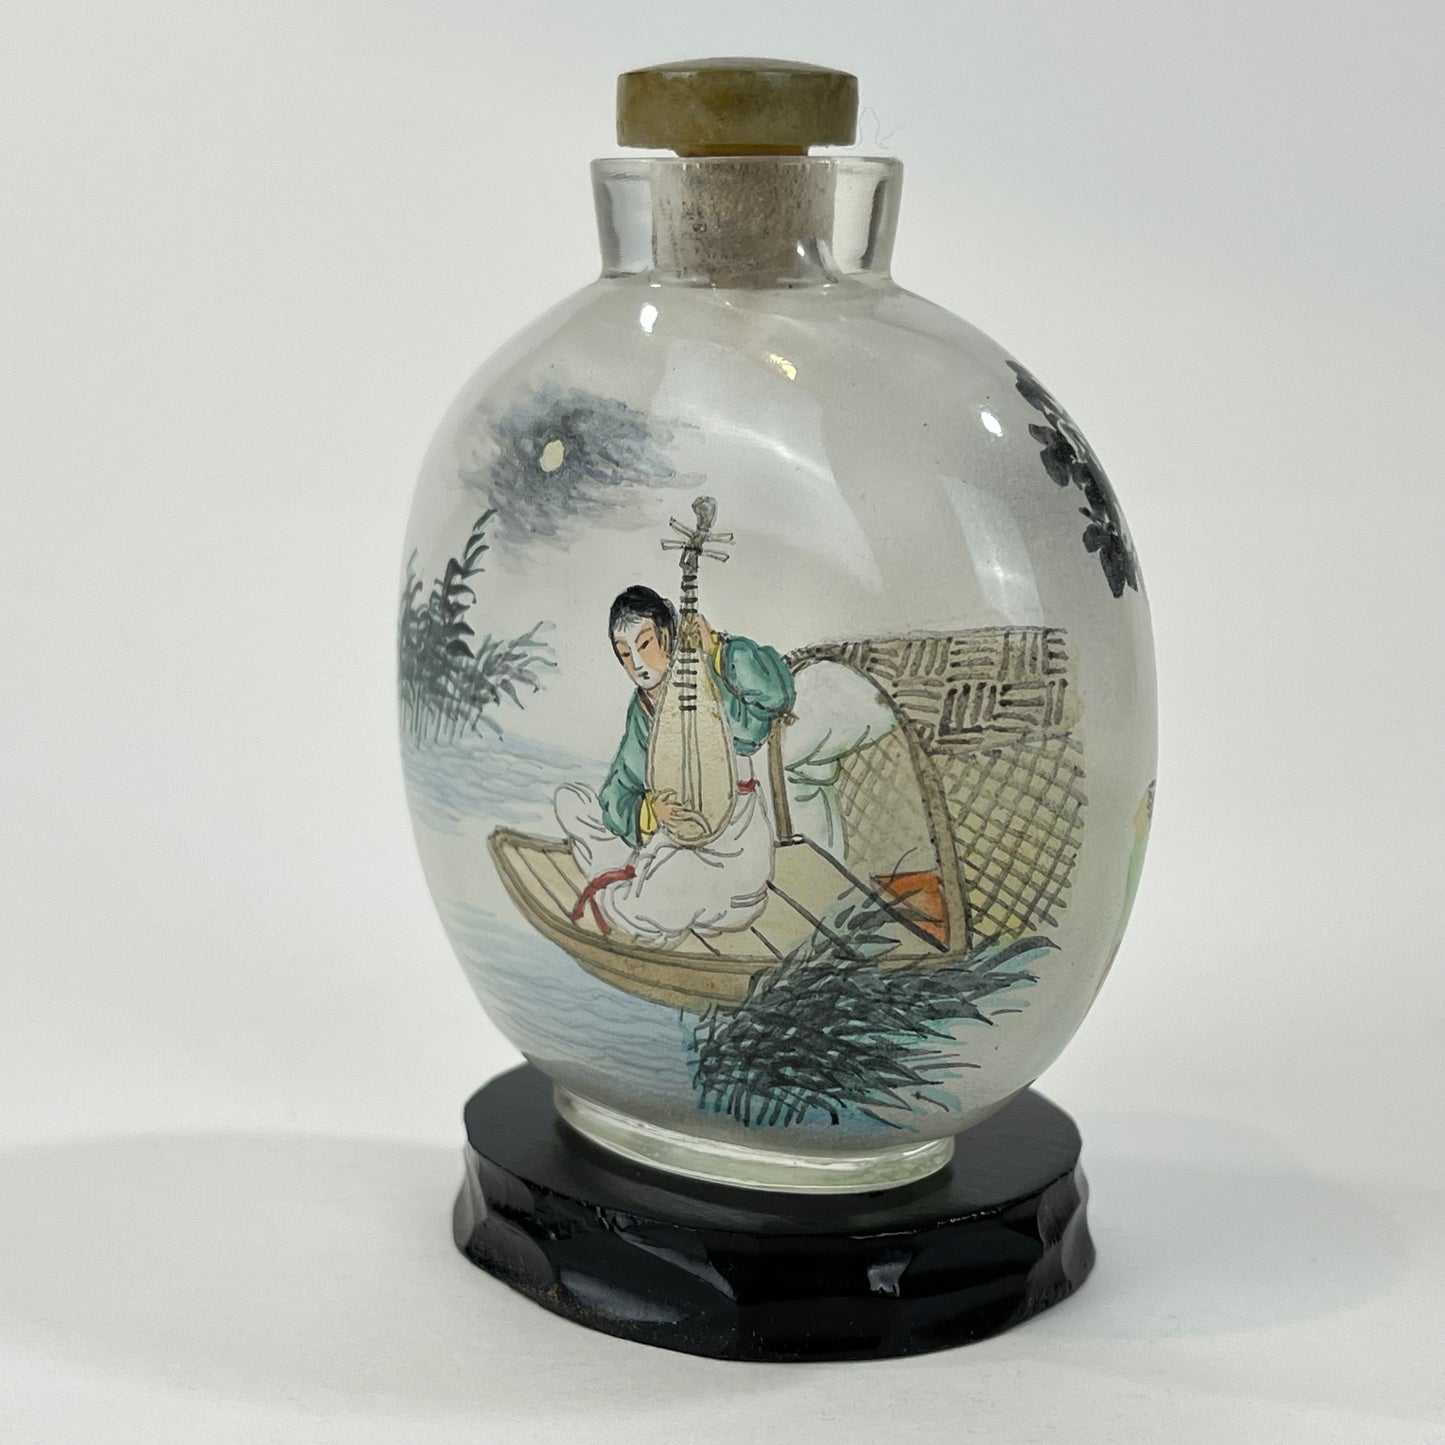 Vintage Chinese Reverse-Painted Snuff Bottle Round 3.5”